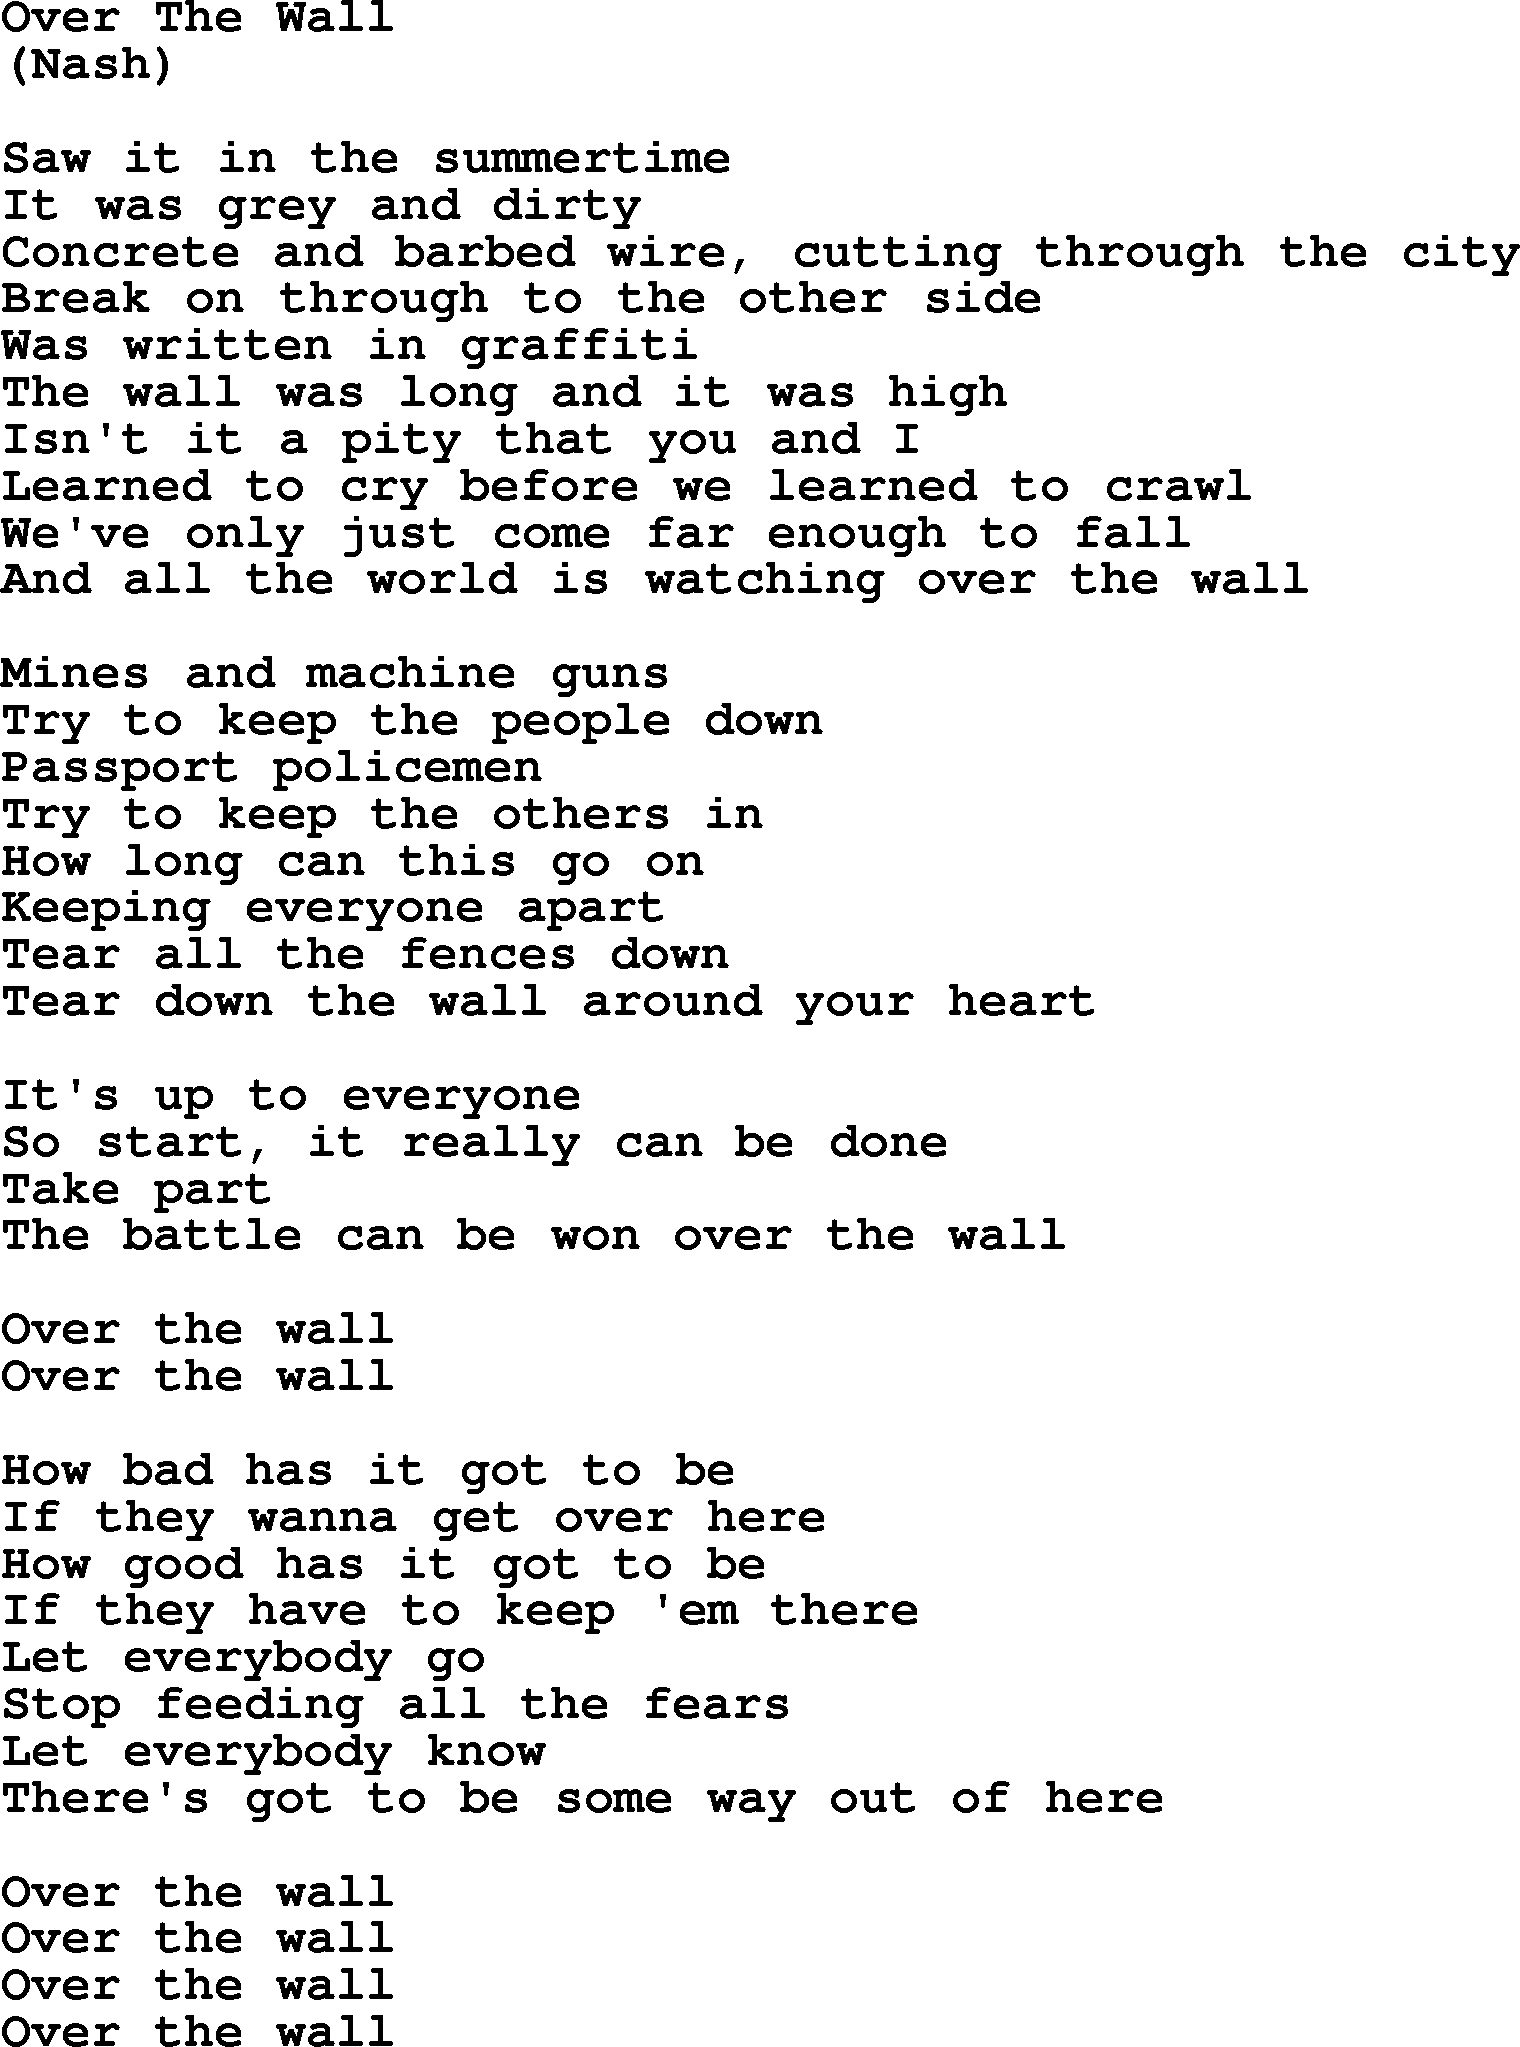 The Byrds song Over The Wall, lyrics